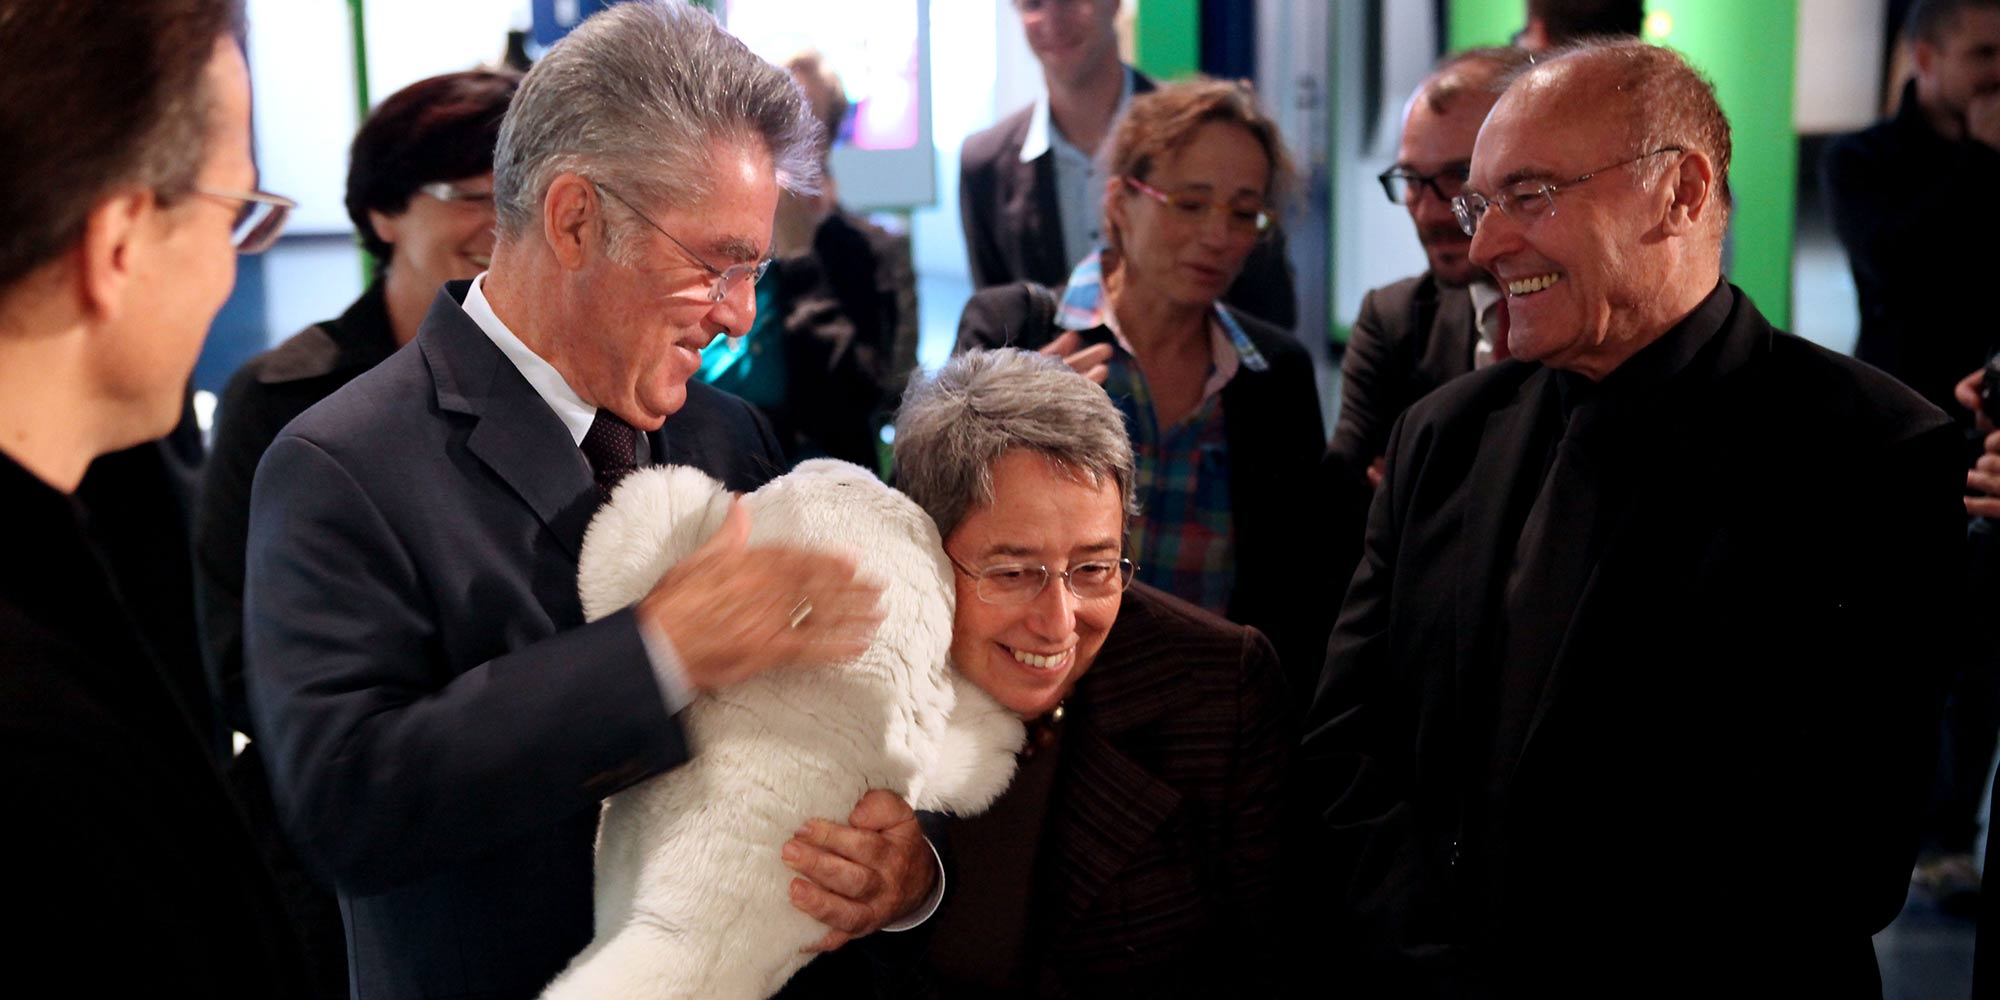 Federal President Heinz Fischer and Margit Fischer during their visit to the Ars Electronica Center.